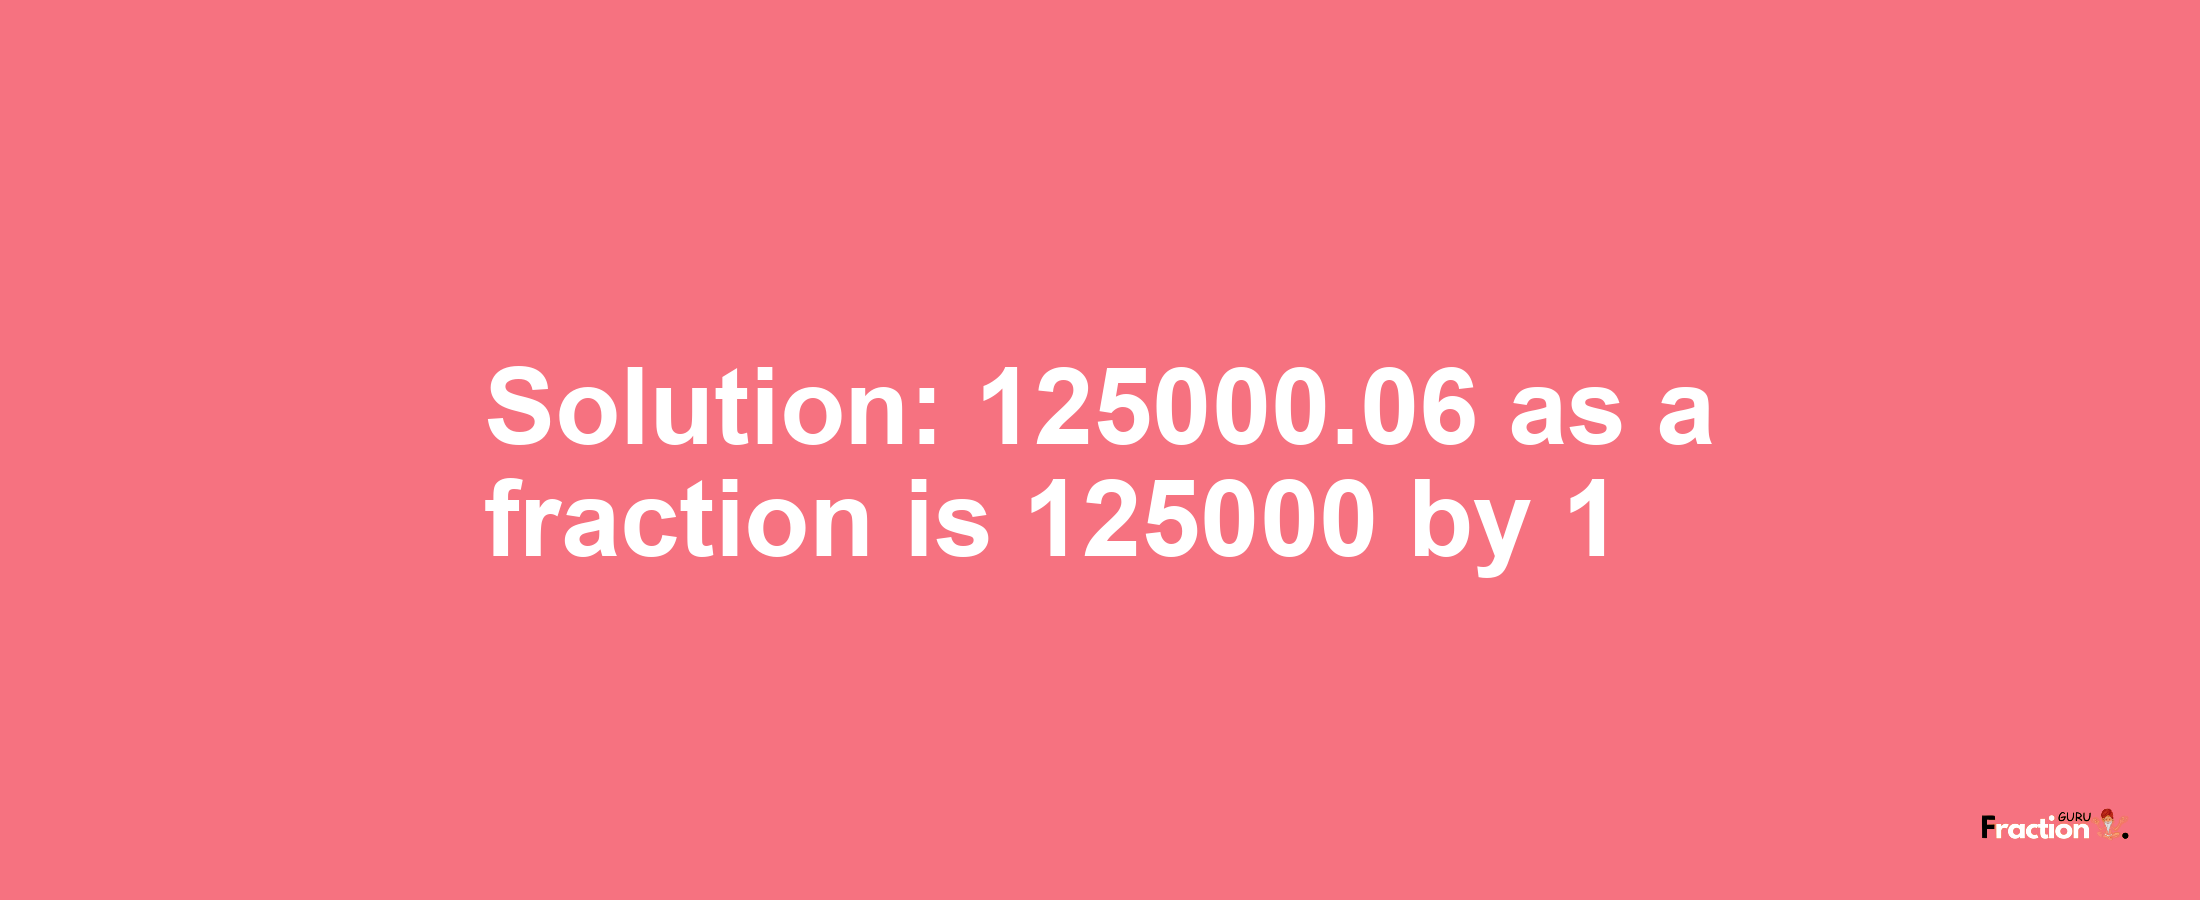 Solution:125000.06 as a fraction is 125000/1